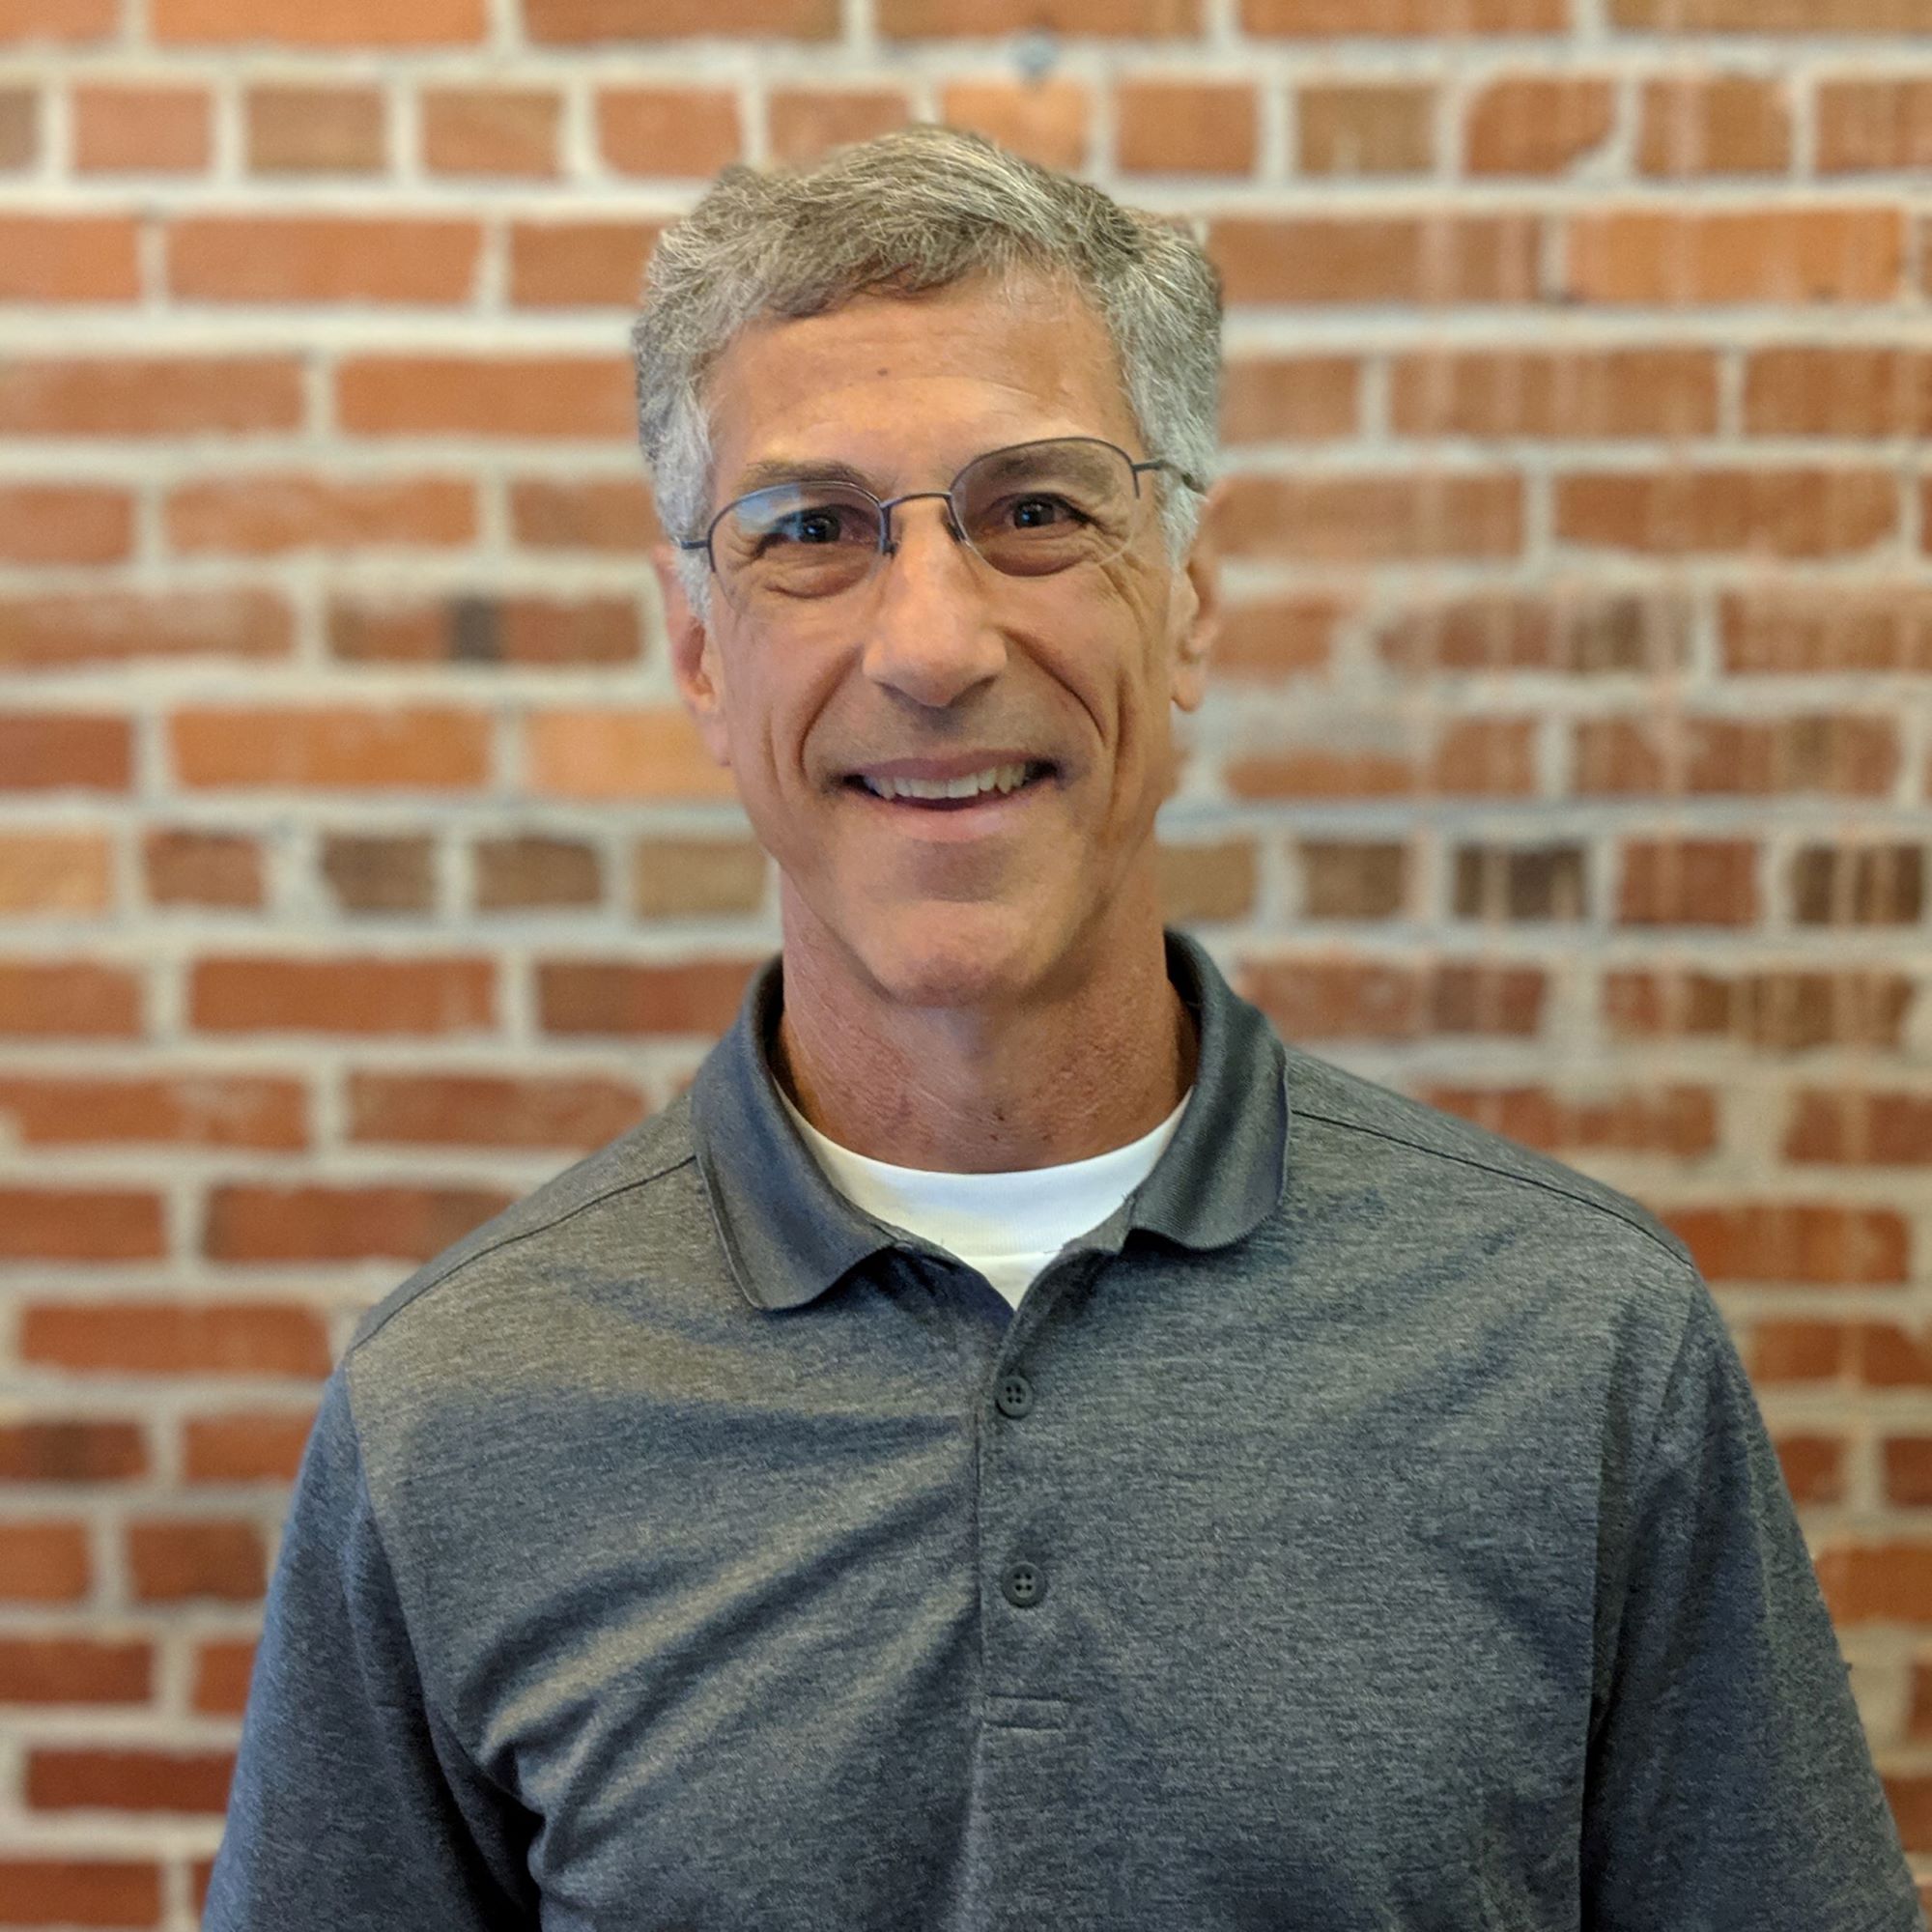 Daniel Bailin Joins RemoteLock as Chief Product Officer